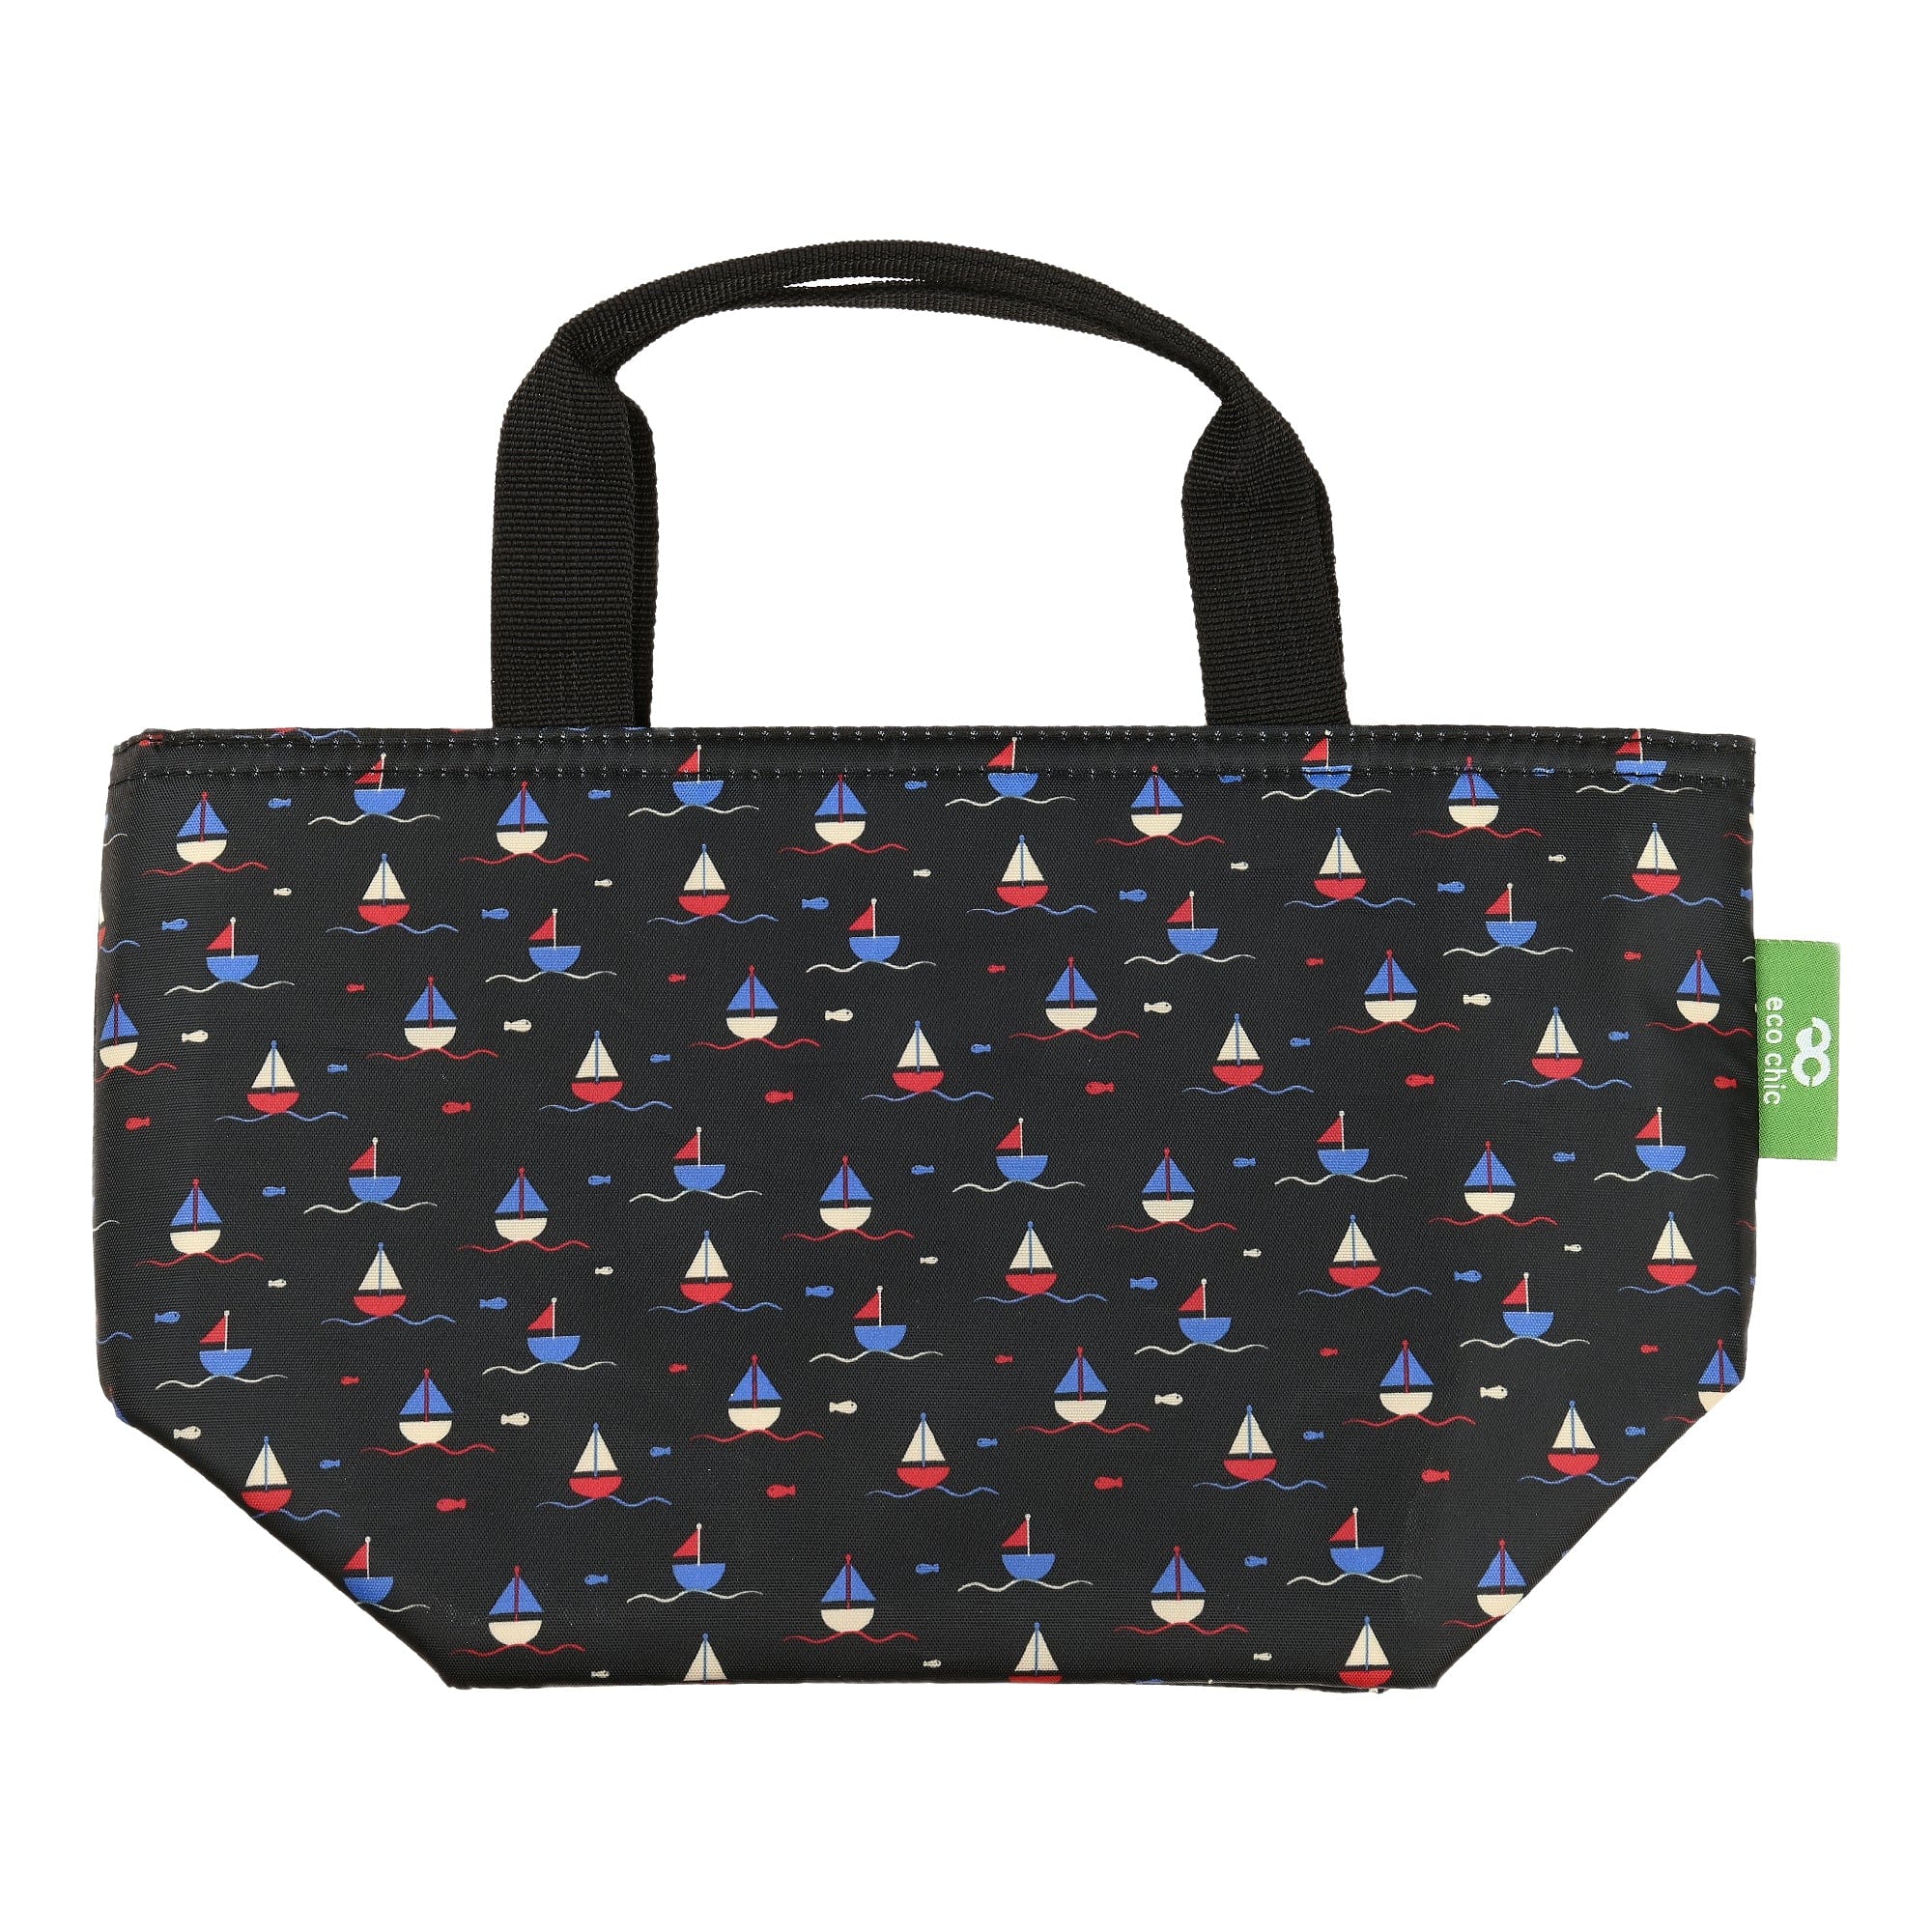 Eco Chic Navy Eco Chic Lightweight Foldable Lunch Bag Yachts